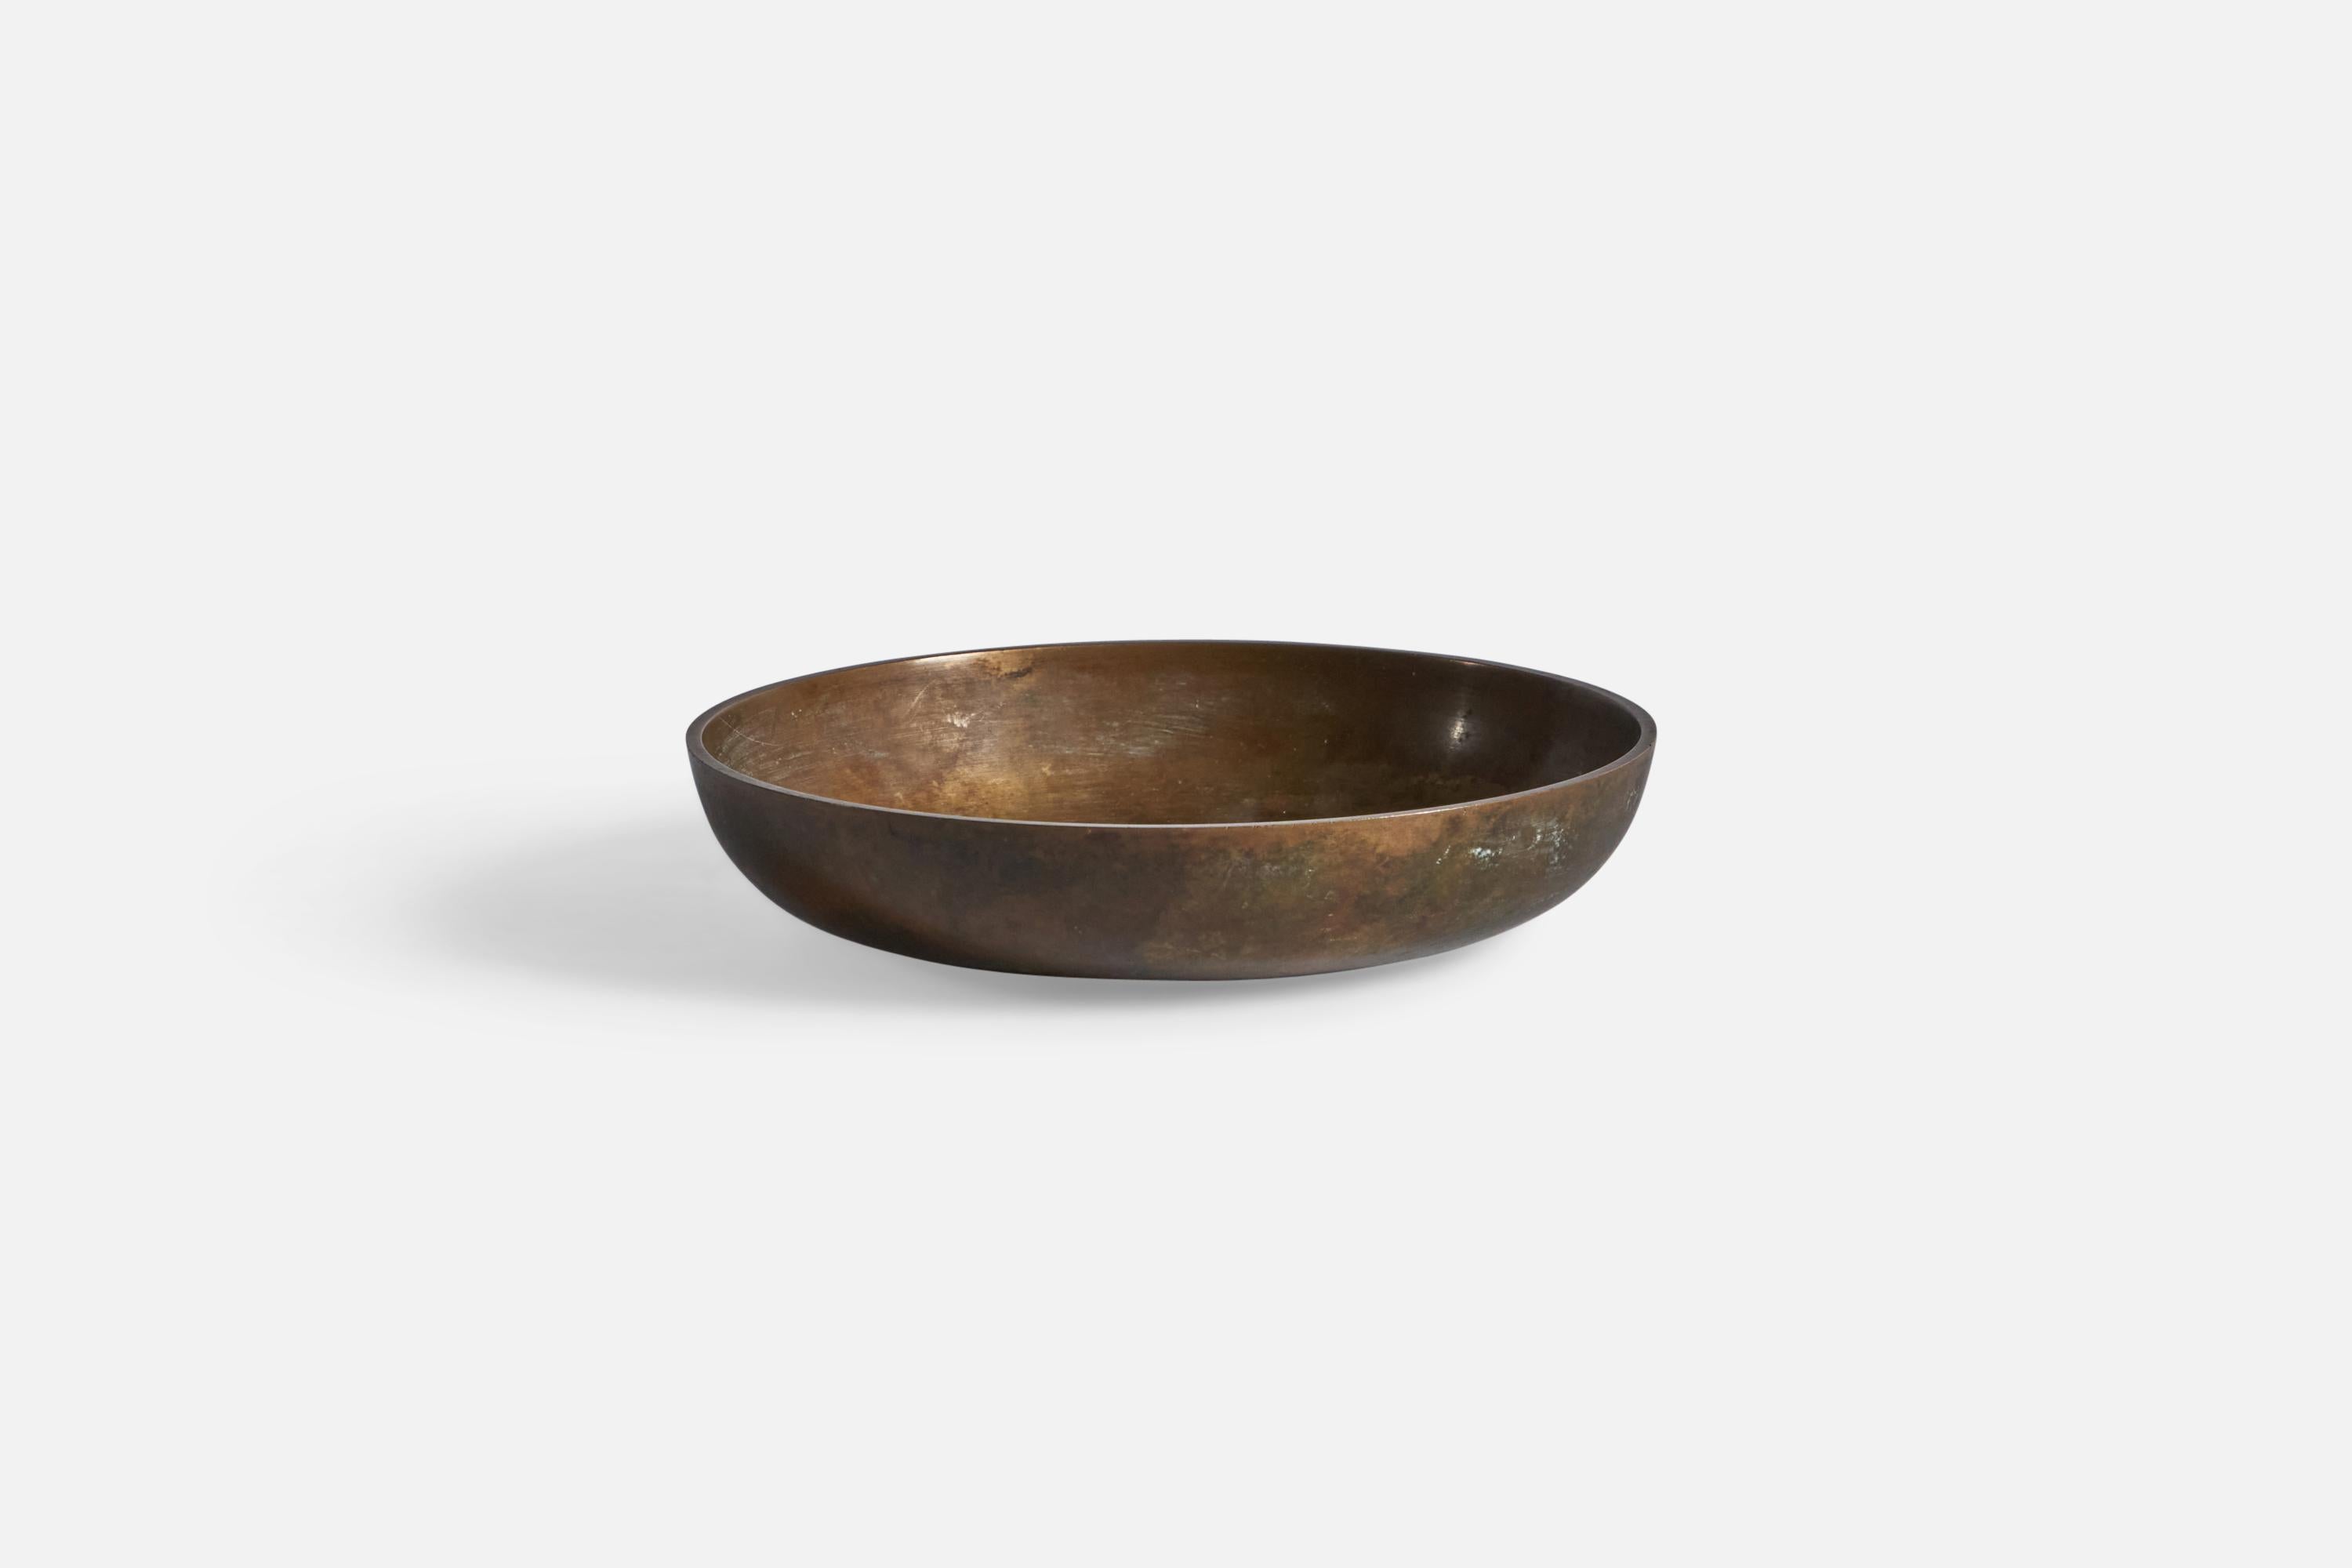 A small bronze bowl designed and produced by Tinos, Denmark, c. 1930s.